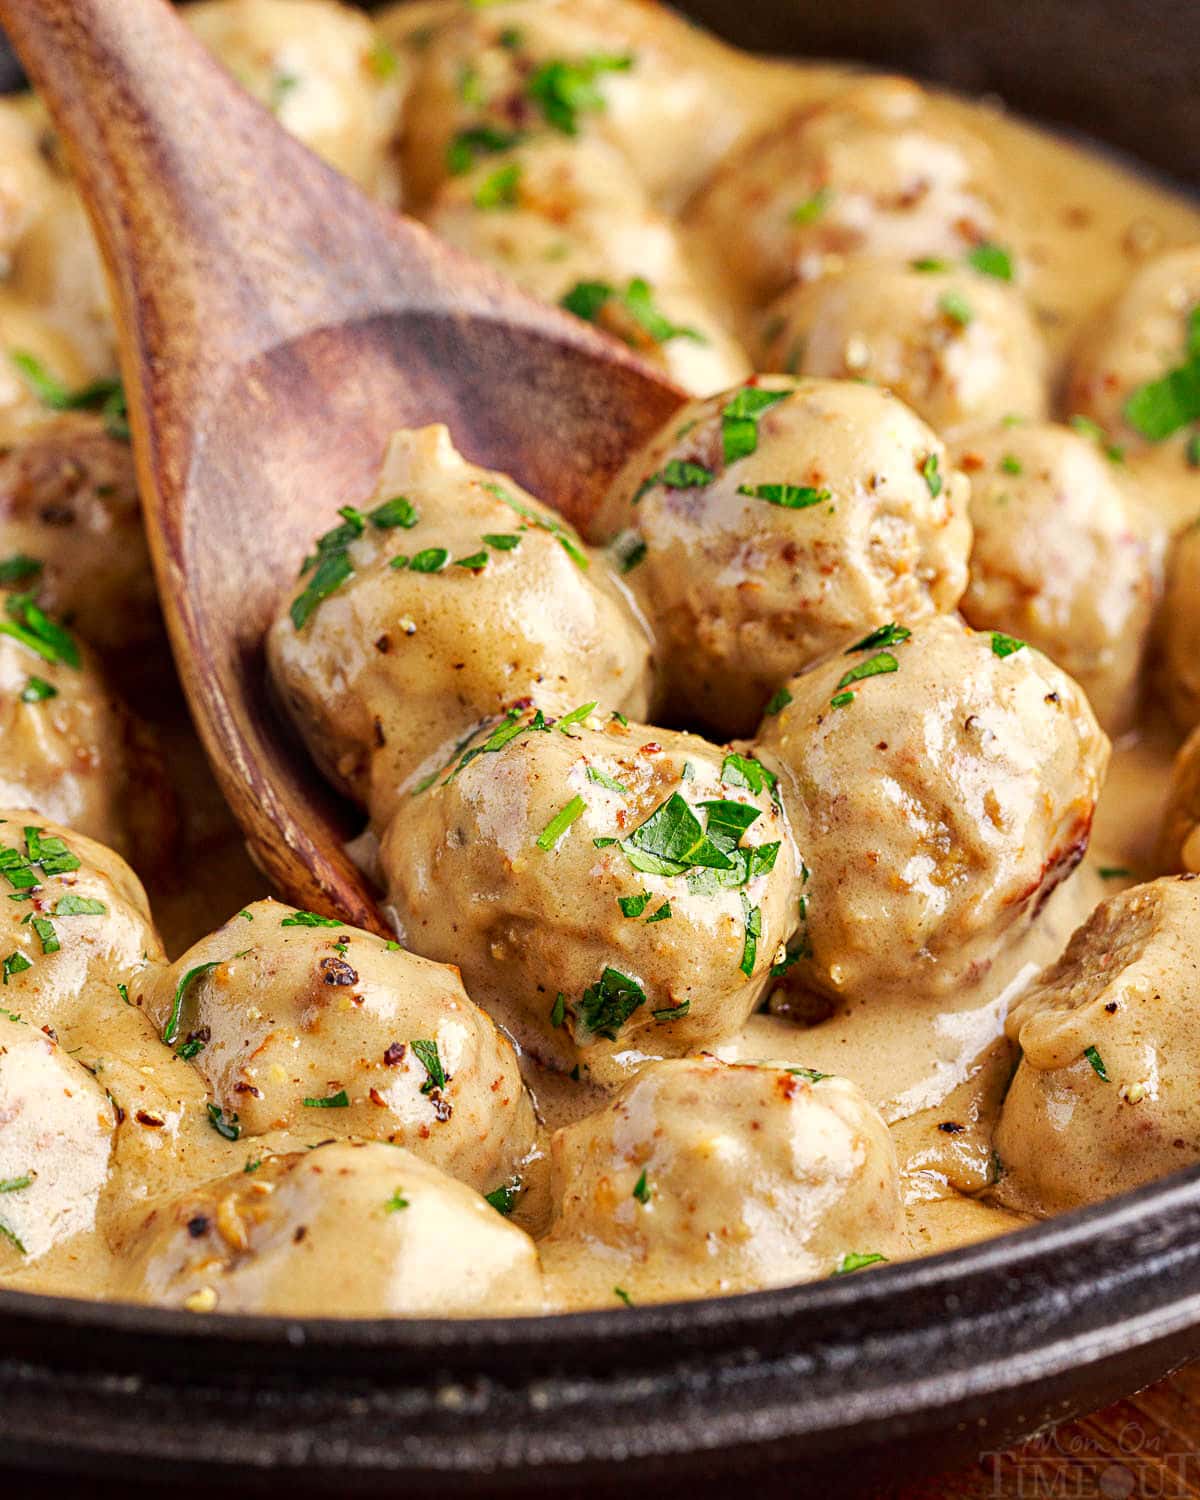 four meatballs on a wooden spoon being scooped out of skillet with the rest of the swedish meatballs and sauce.